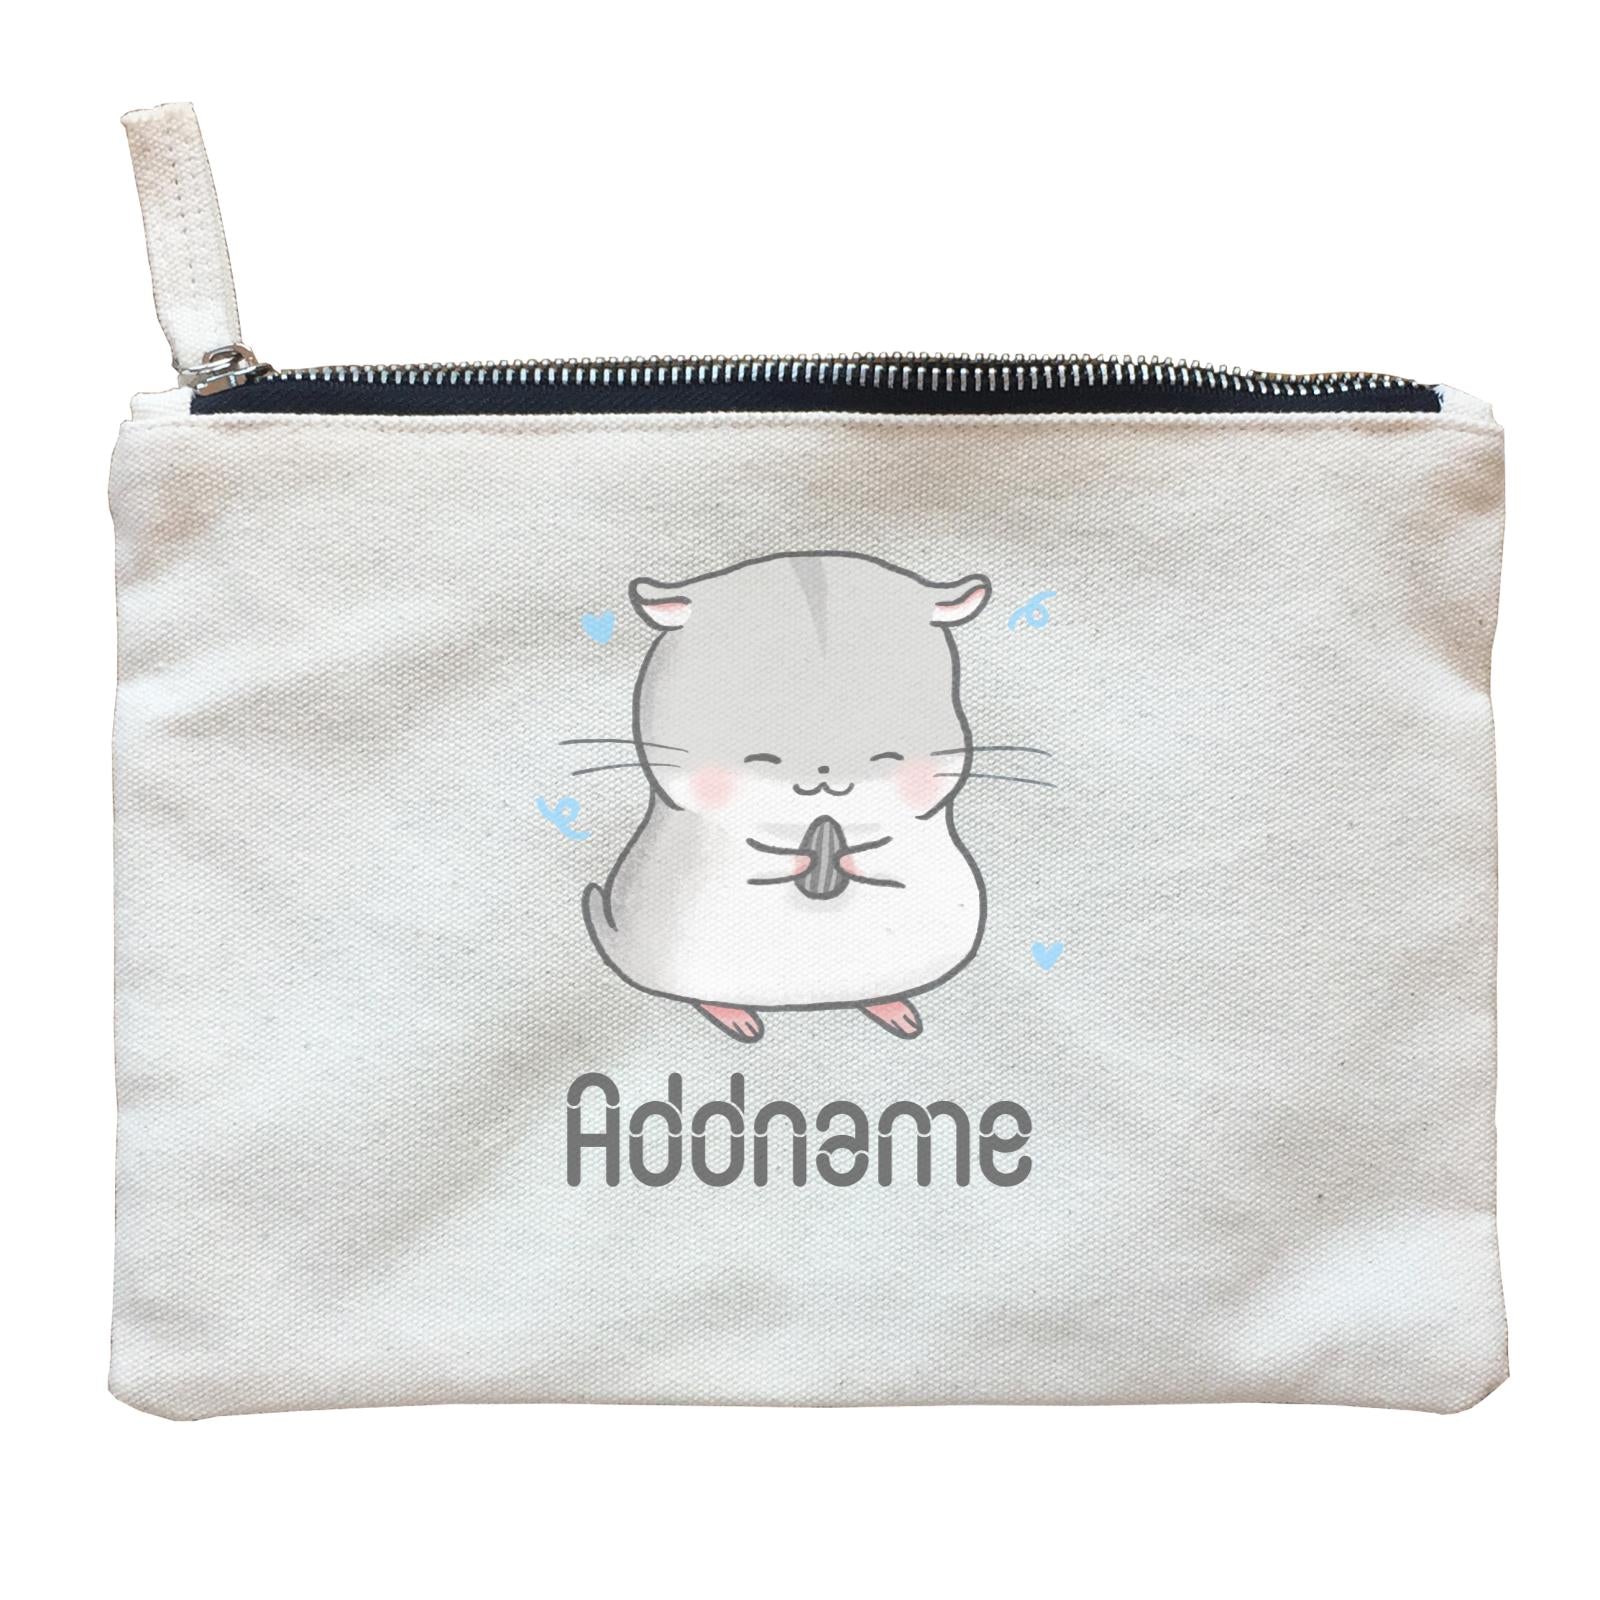 Cute Hand Drawn Style Hamster Addname Zipper Pouch